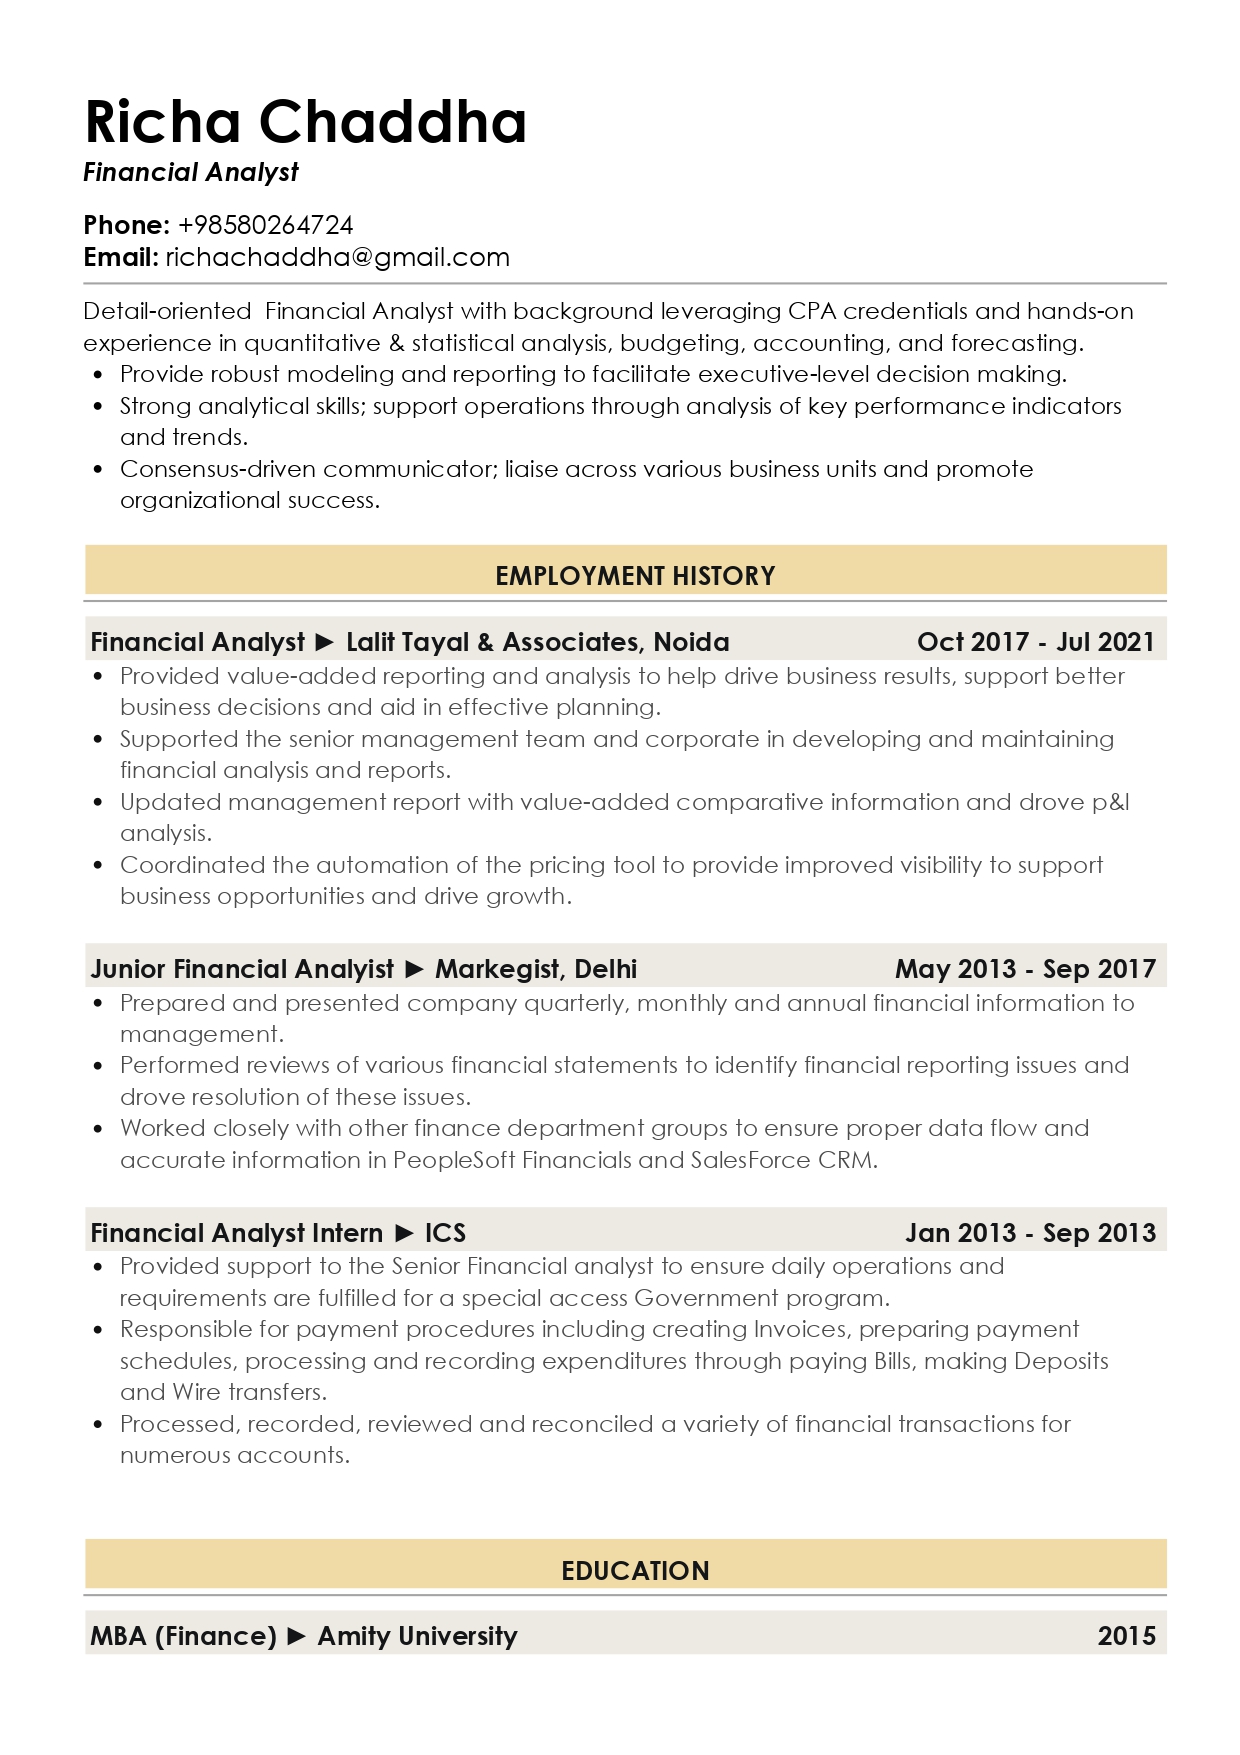 Resume of Financial Analyst1